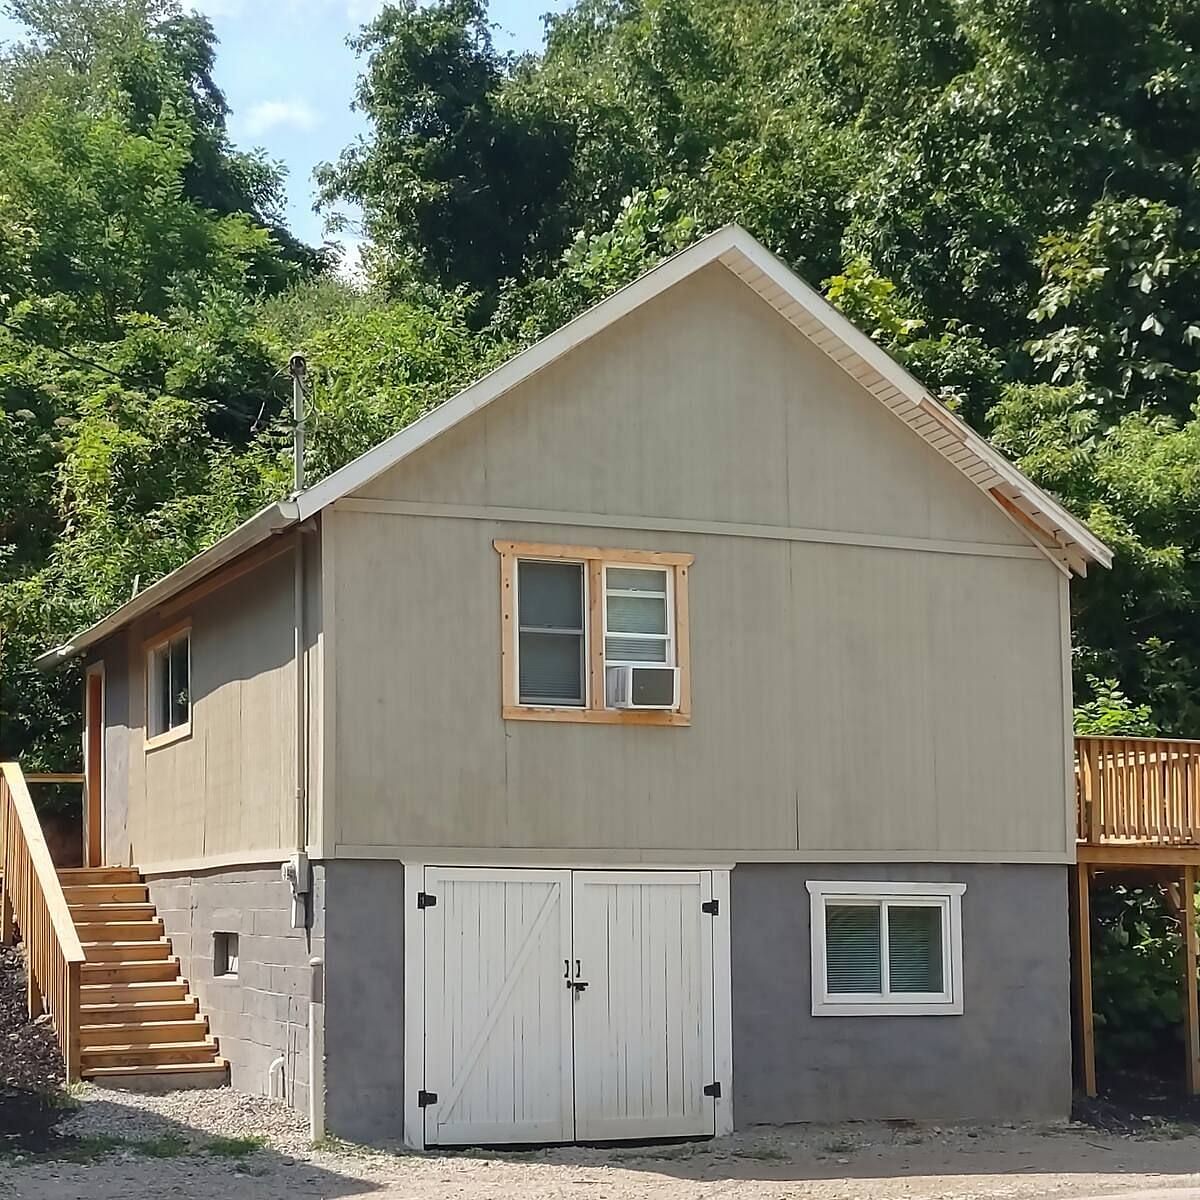 JWguest House at Spencer, West Virginia | A comfy home away from home | Jwbnb no brobnb 1